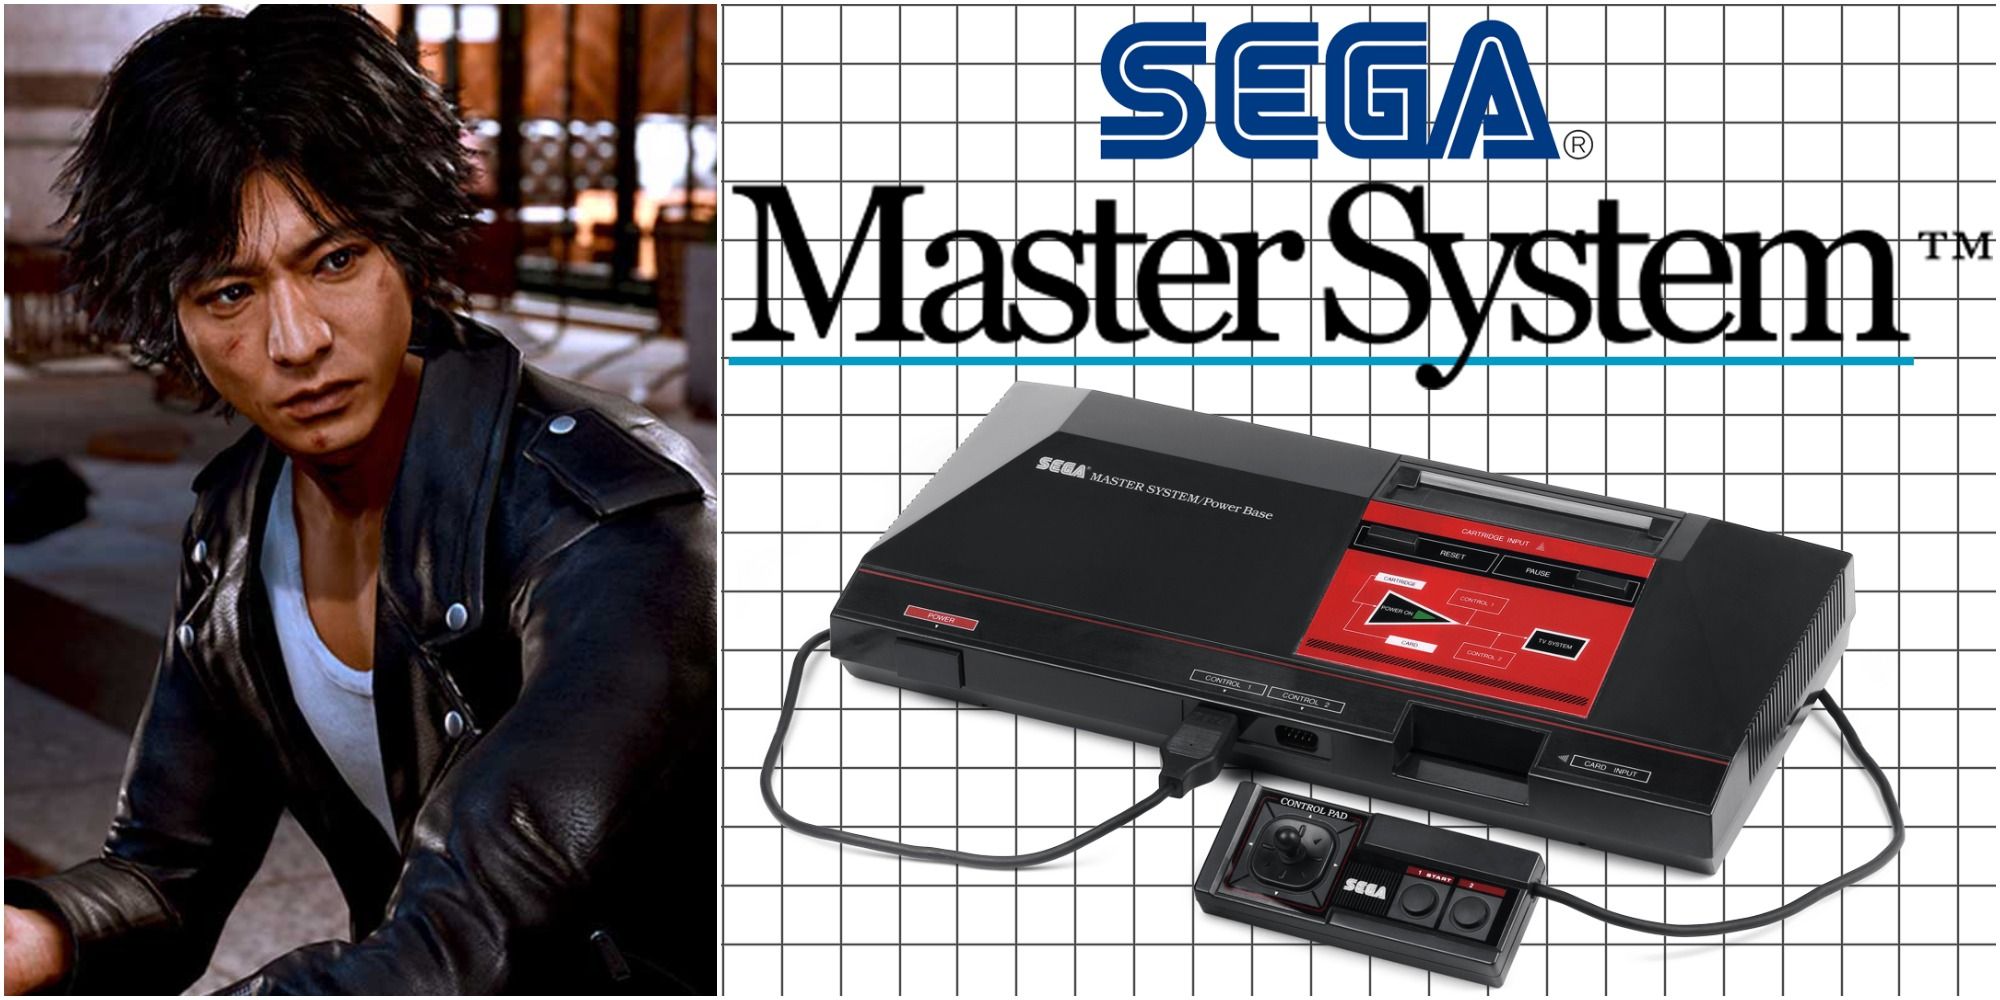 Lost Judgment 8 Sega Master System Games Feature Image with Takayuki Yagami wearing lether jacket